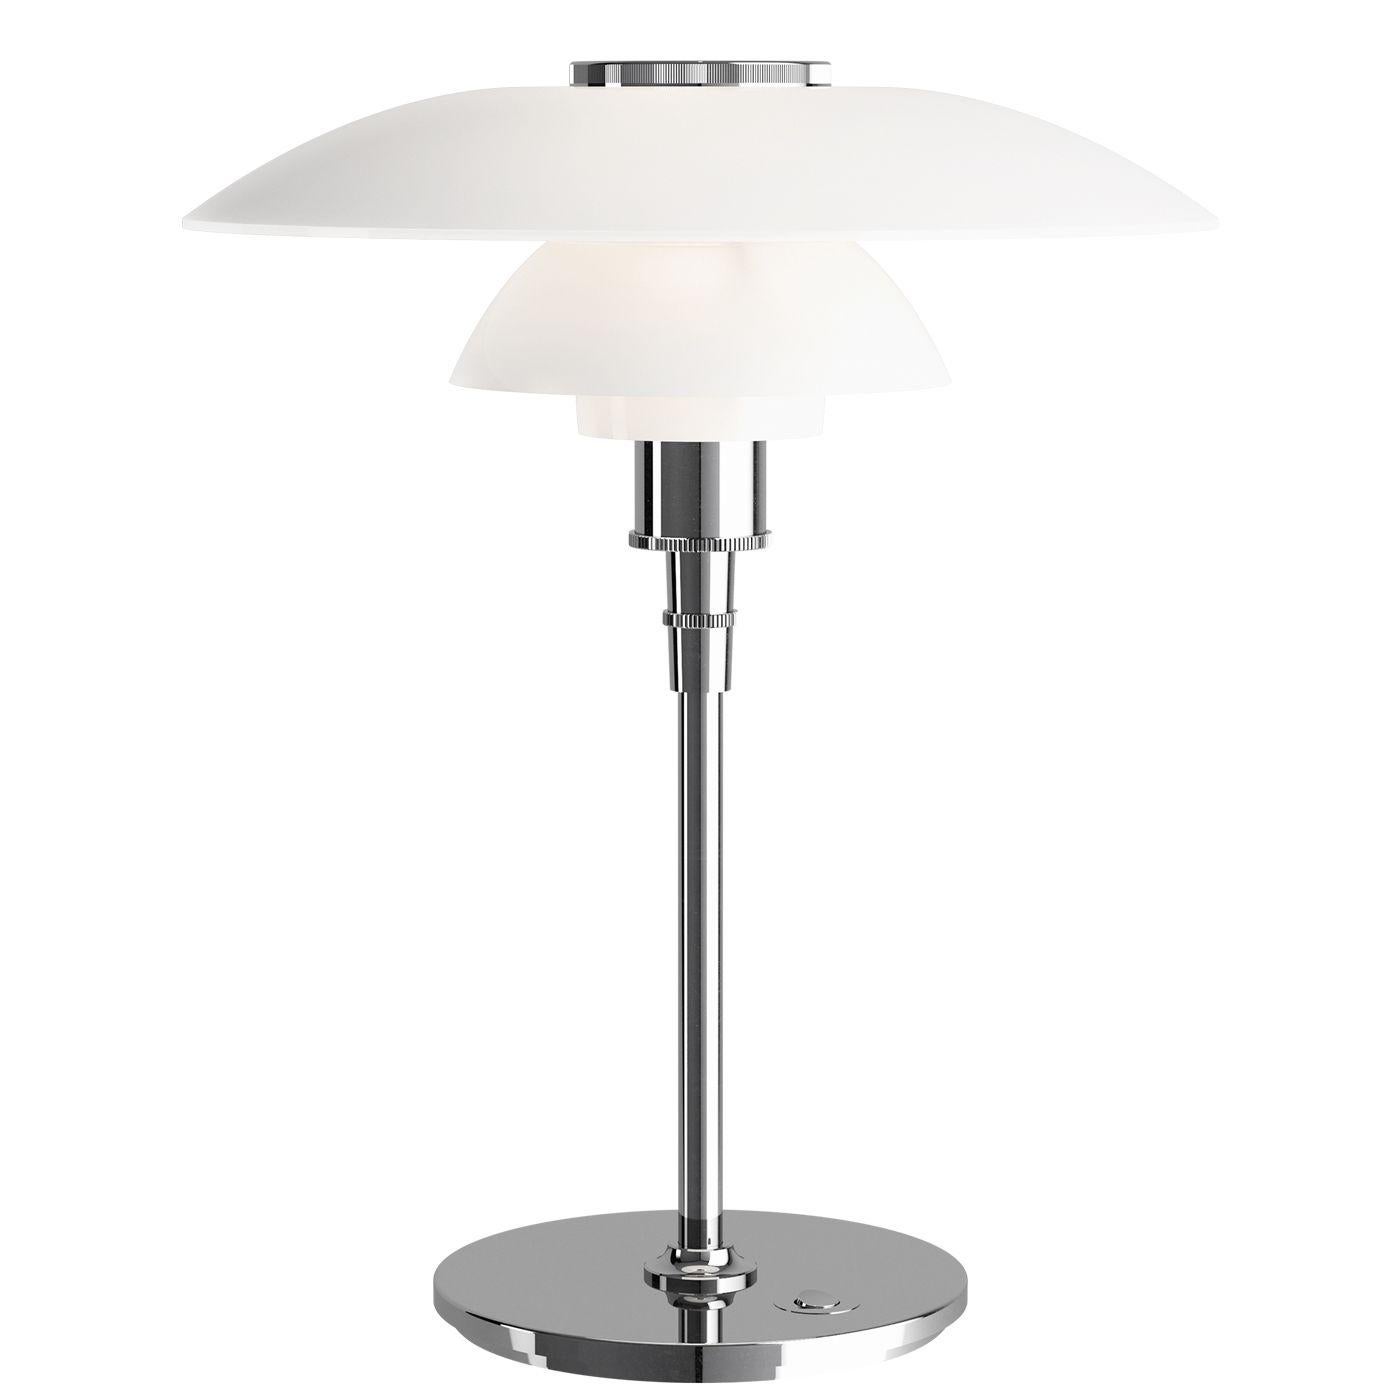 Louis Poulsen, large glass table light by Poul Henningsen
Measures: Width x Height x Length (mm)
450 x 550 x 450, 9.3 kg
Material: Shades in mouth-blown white opal glass with top plate and body in bright chrome plated brass and steel. Measure: